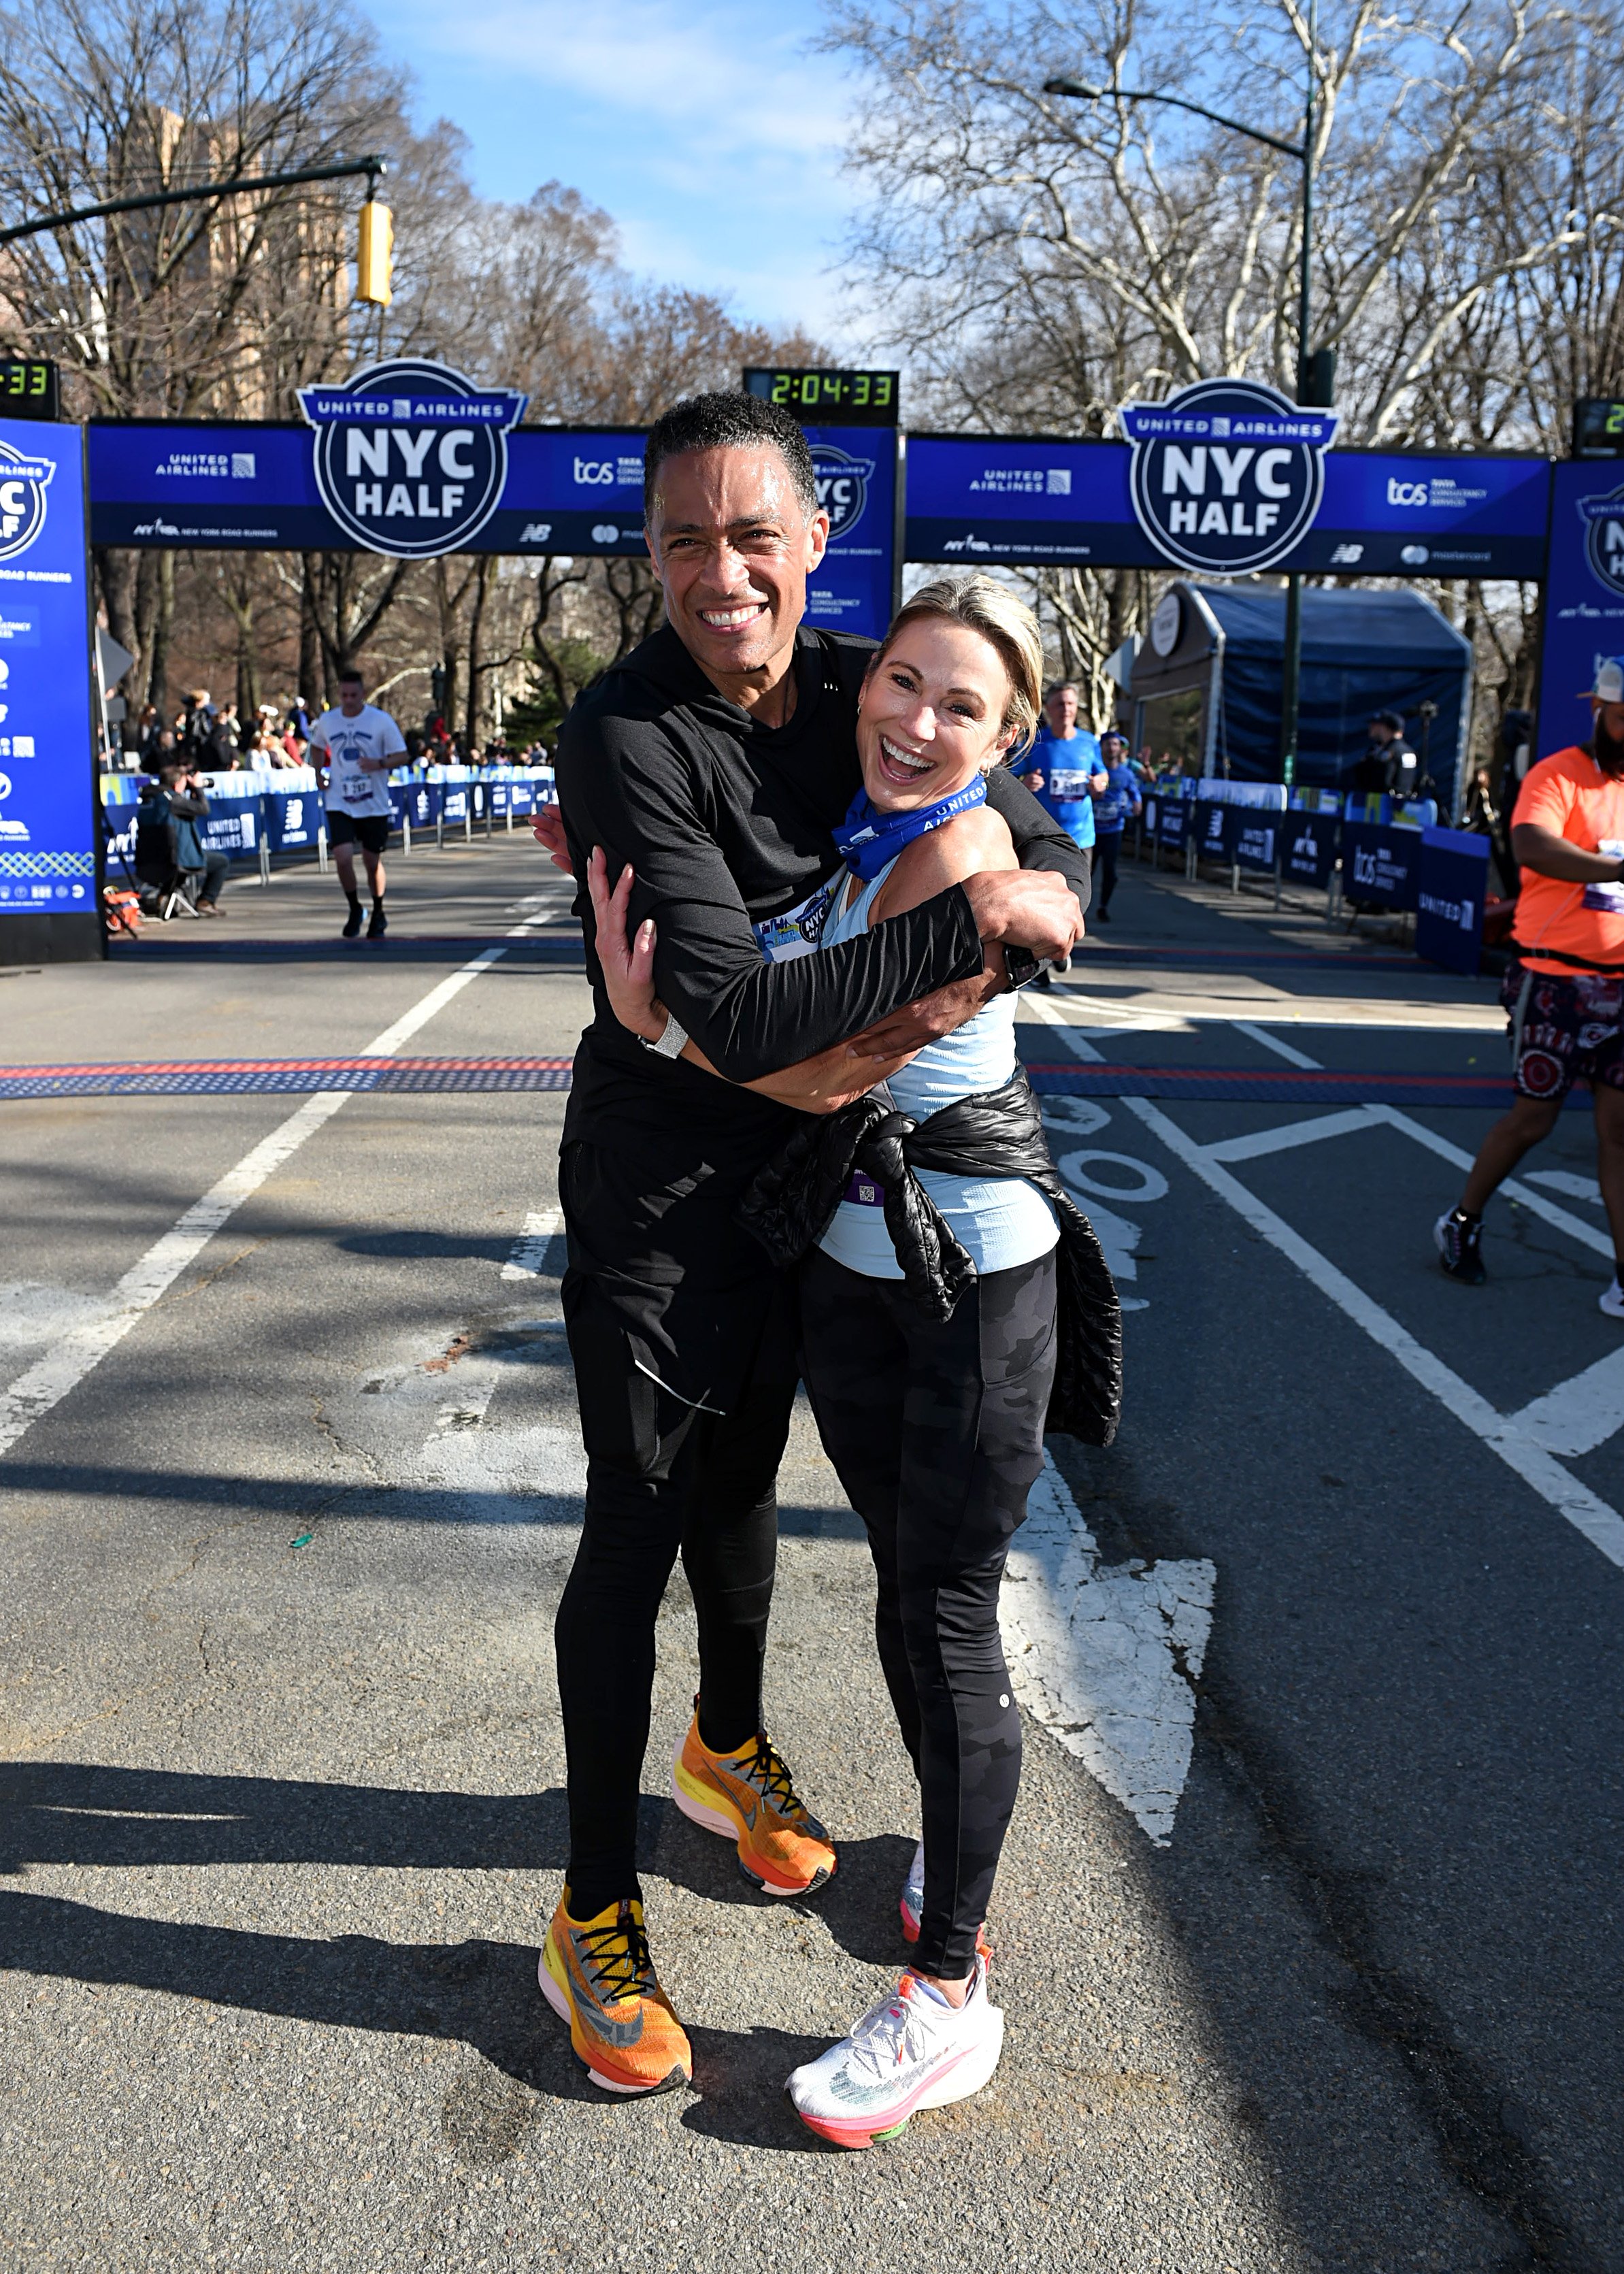 TJ Holmes and Amy Robach embracing during the 2022 United Airlines NYC Half Marathon on March 20, 2022, in New York City | Source: Getty Images